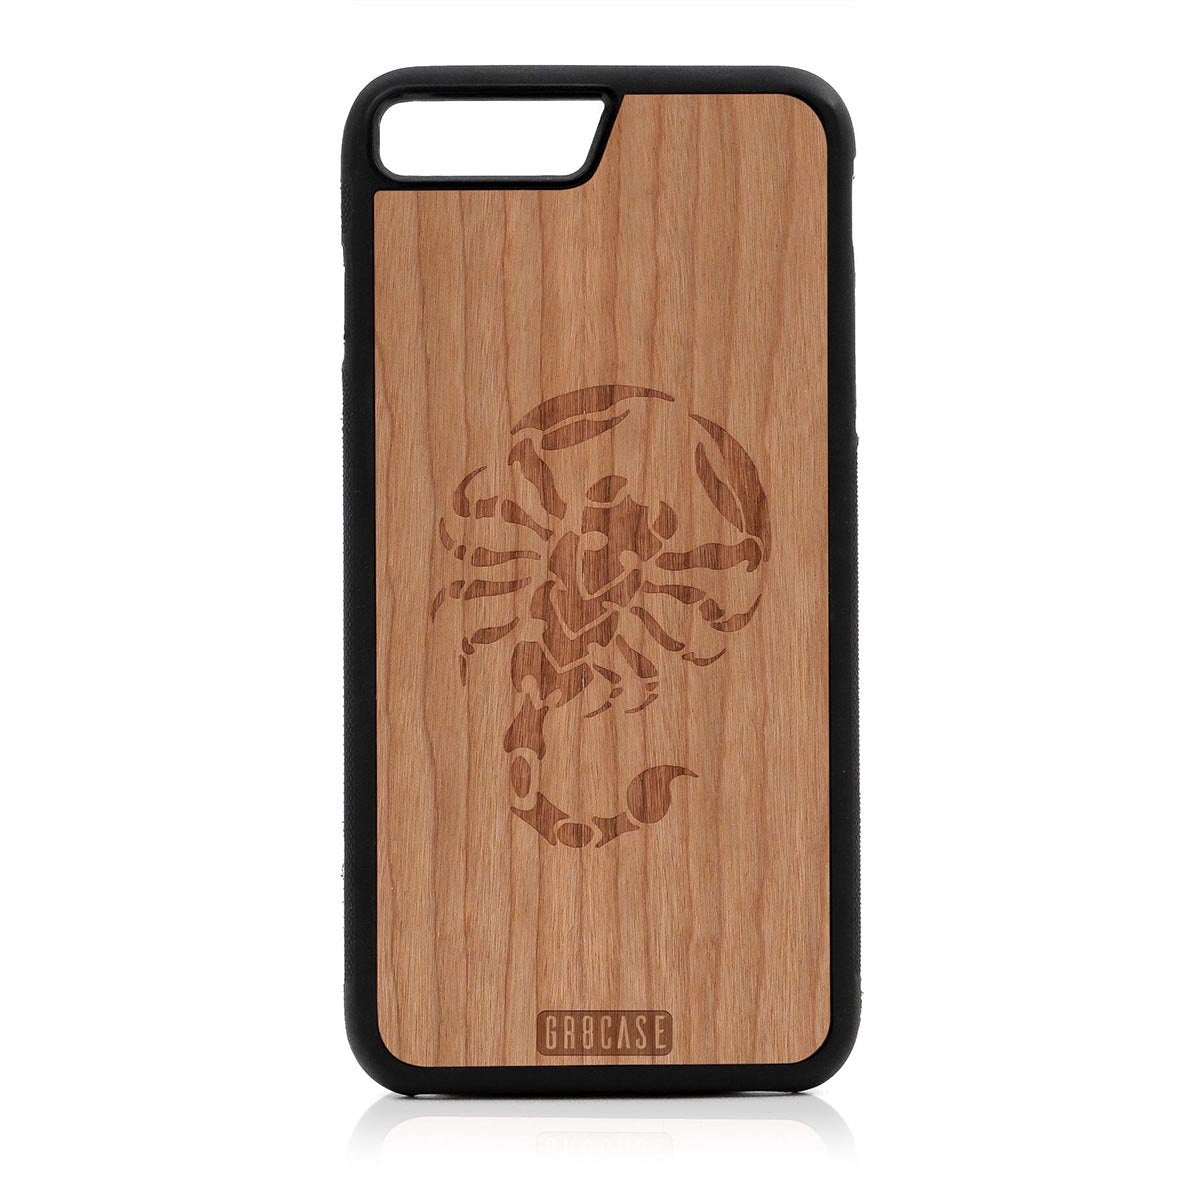 Scorpion Design Wood Case For iPhone SE 2020 by GR8CASE